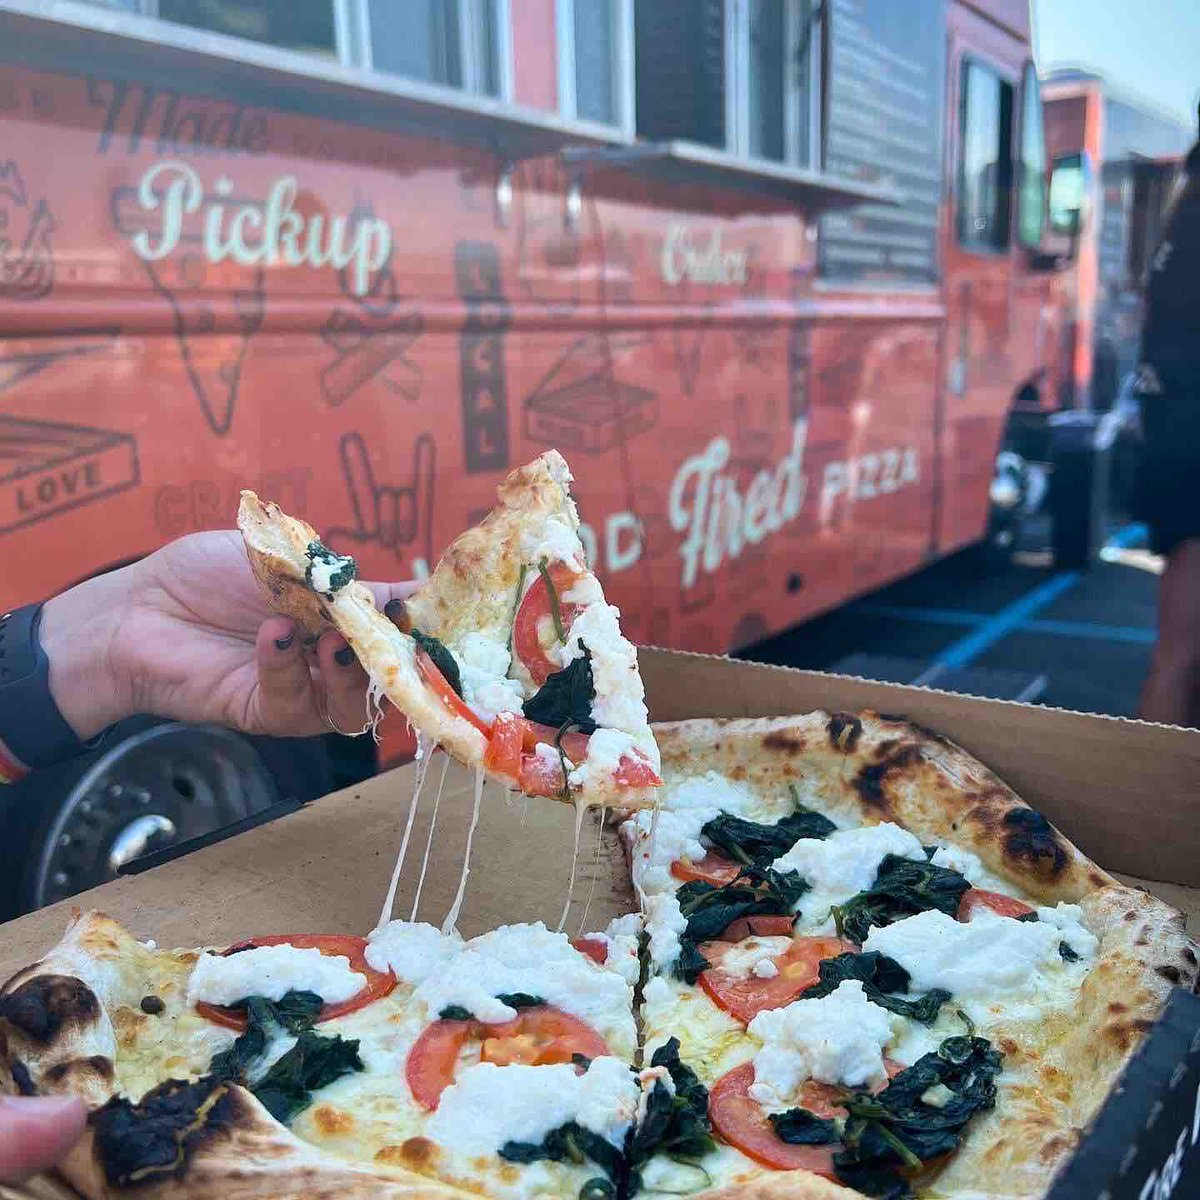 It’s the unofficial start of food truck season! Join us TONIGHT for opening night of the Sharon Chevrolet #SYRFoodTrucks Takeover at Great Northern Mall in Clay. Order ahead at StreetFoodFinder.com/tossnfirepizza. ✌️❤️🍕🚚🎉